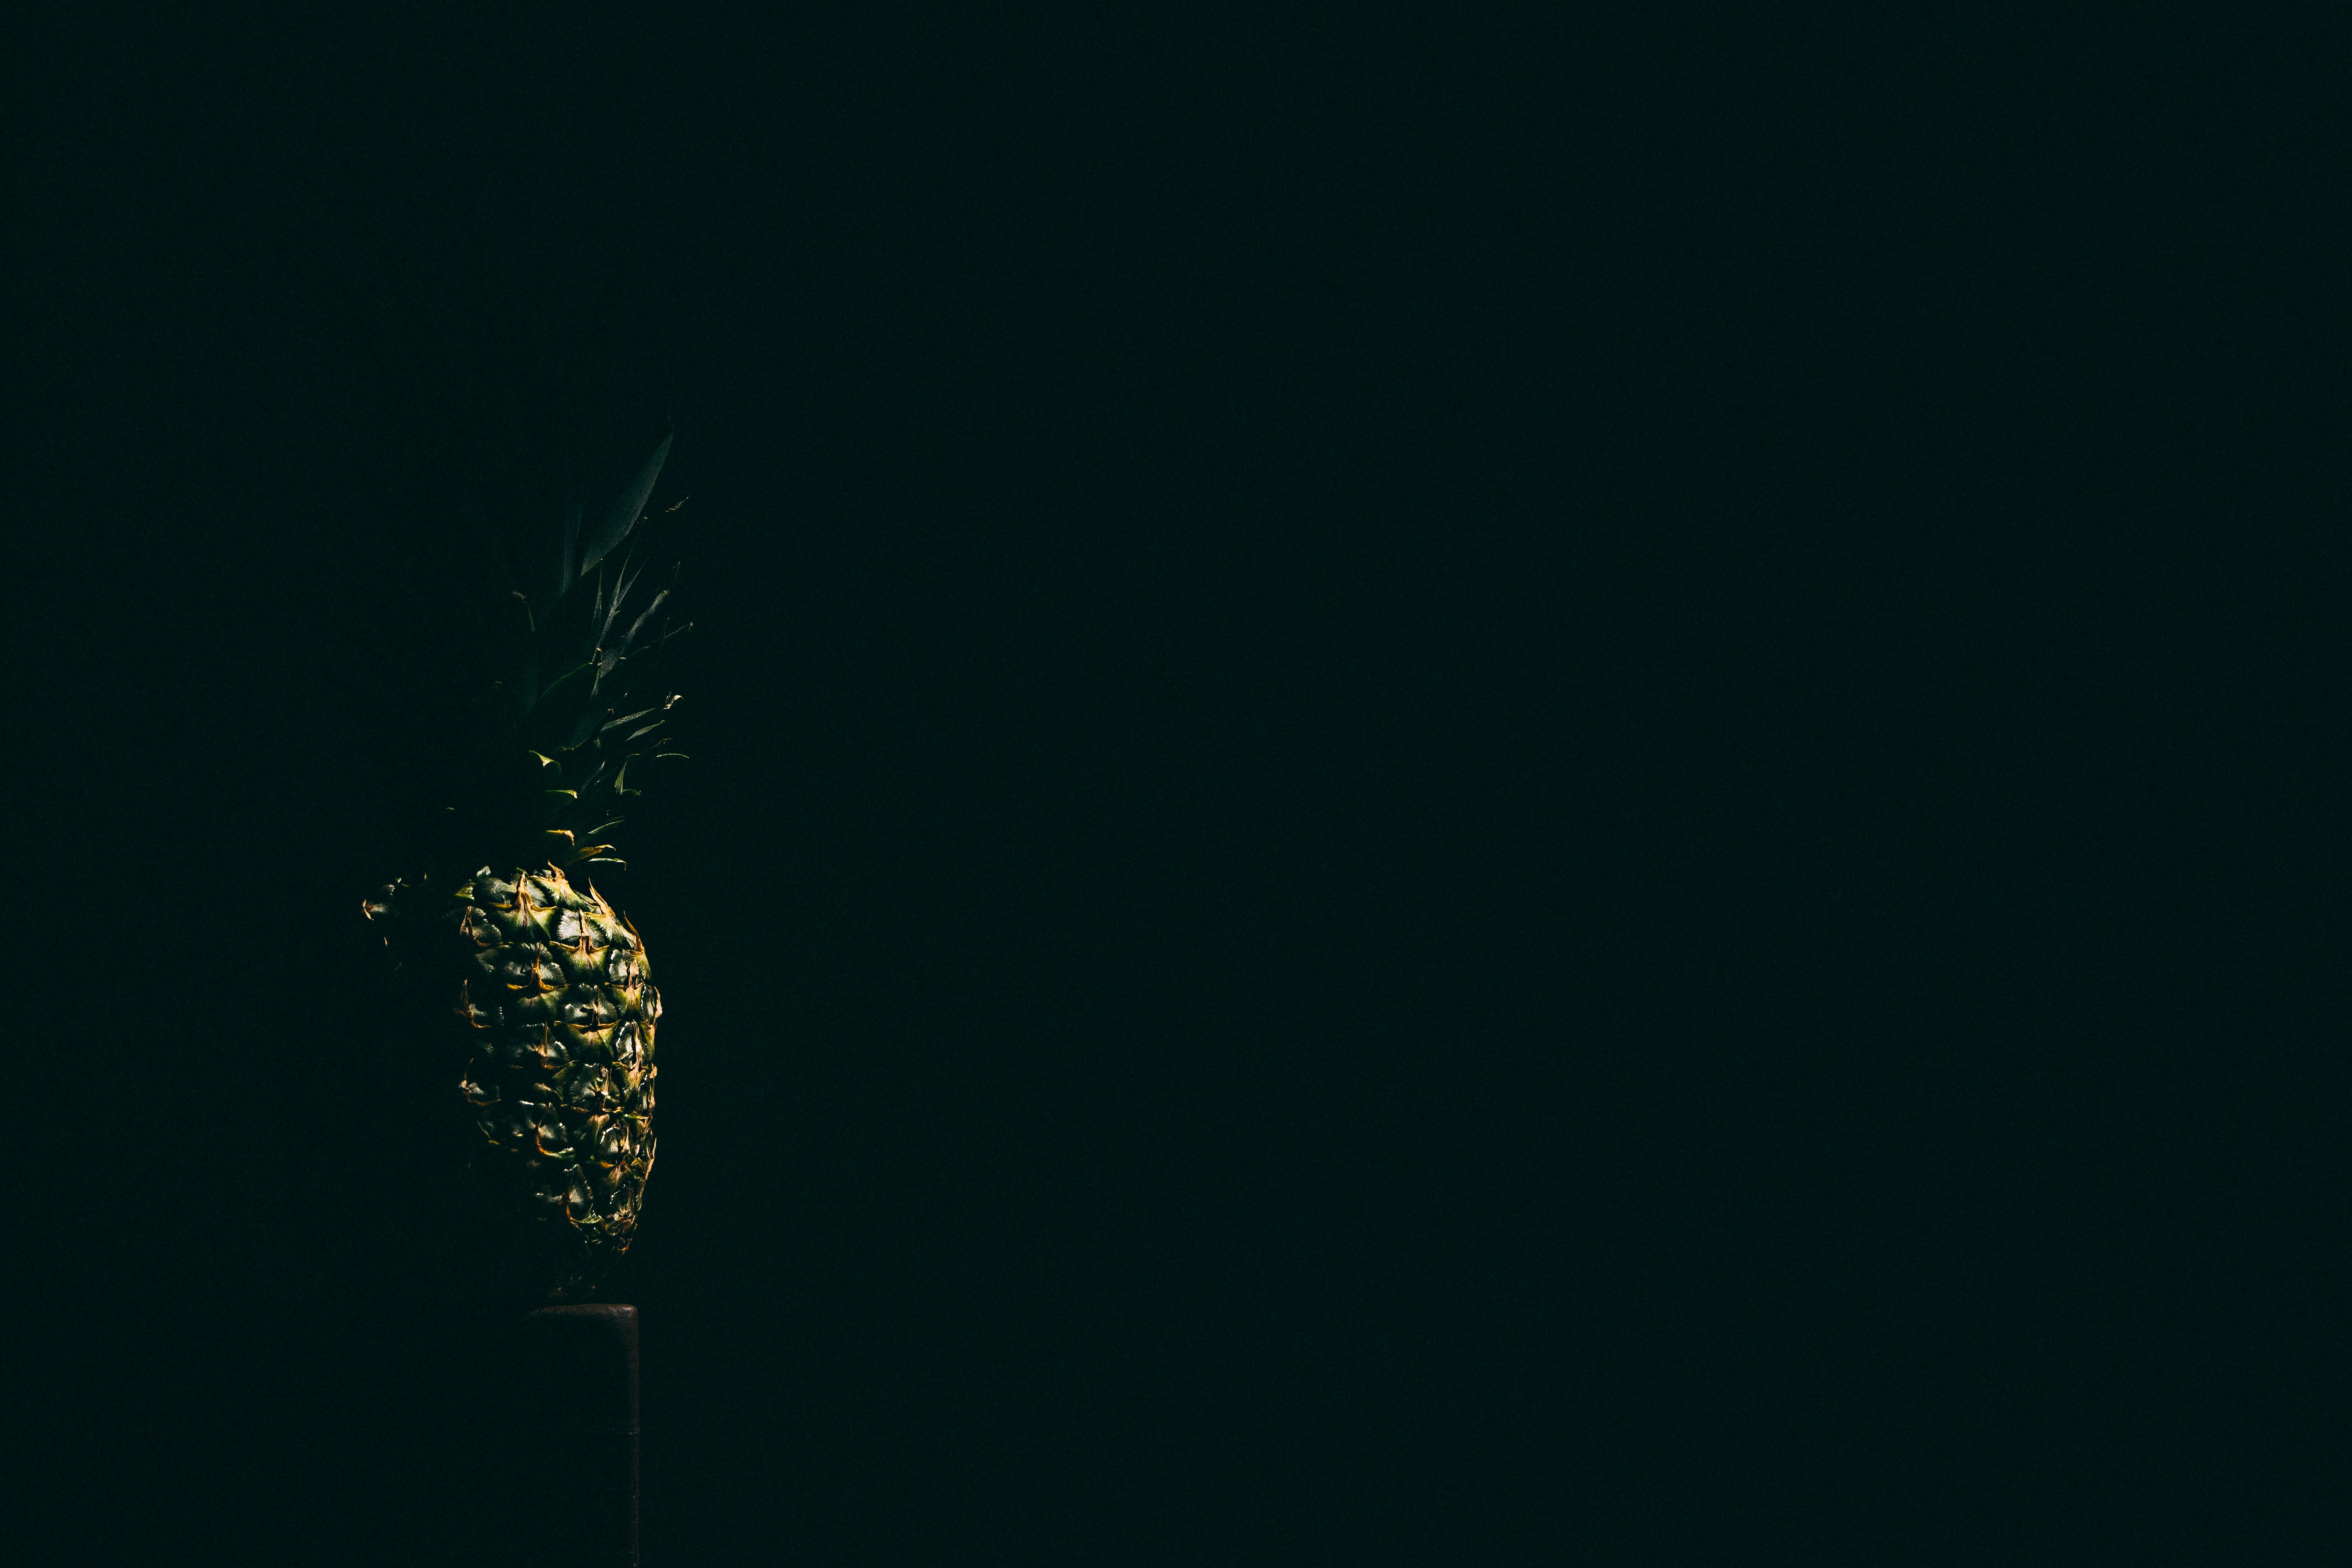 yellow and green pineapple